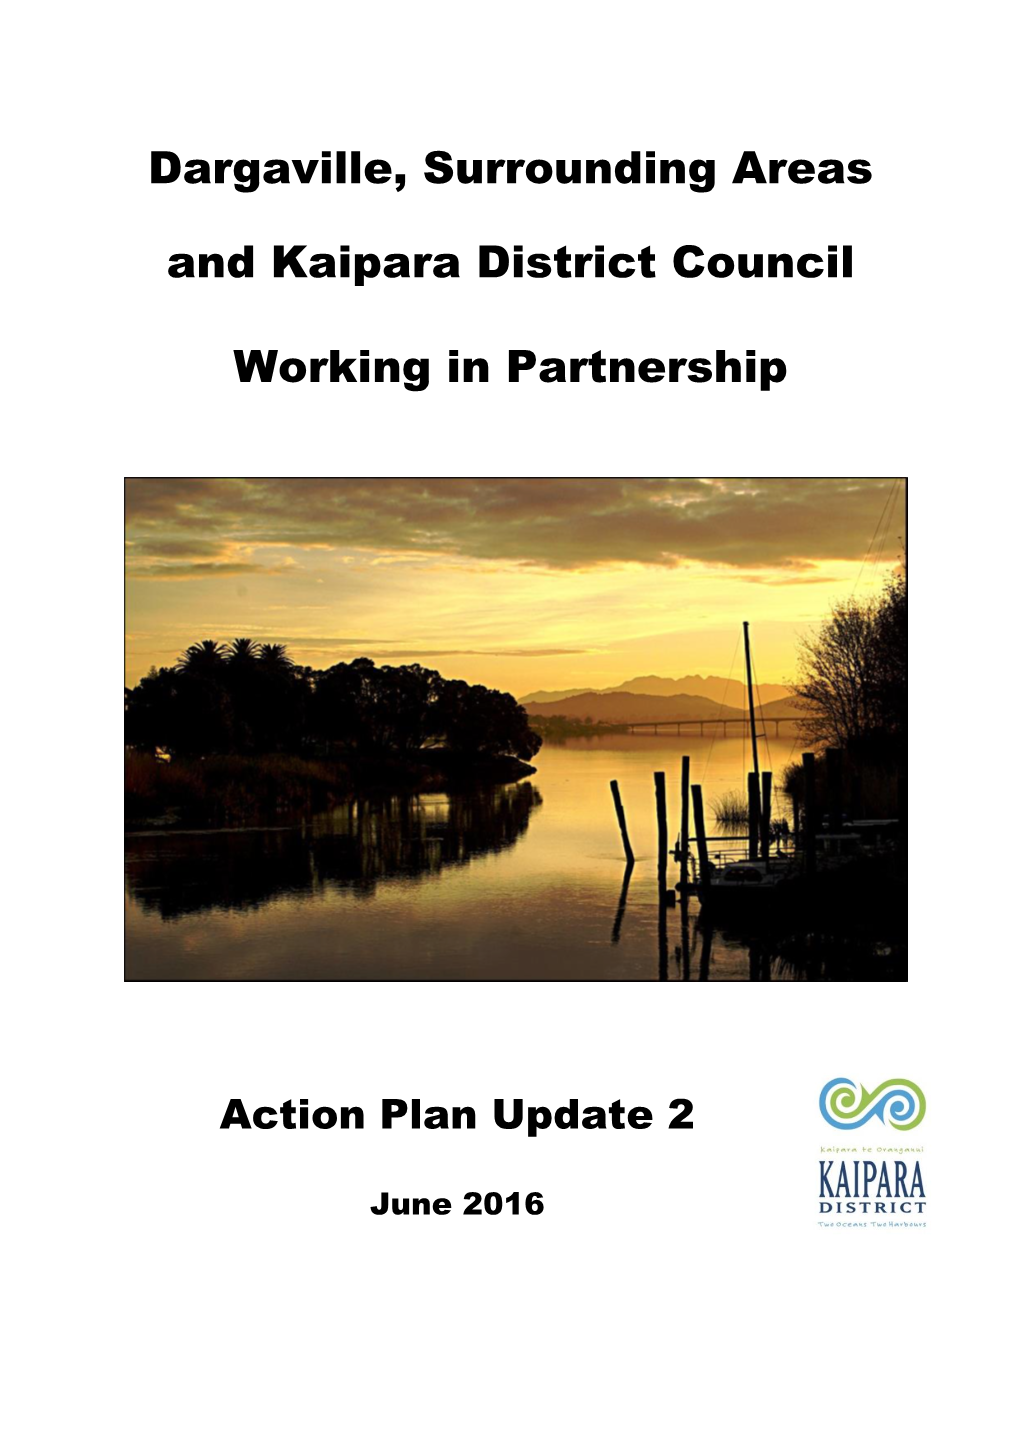 Dargaville, Surrounding Areas and Kaipara District Council Working In